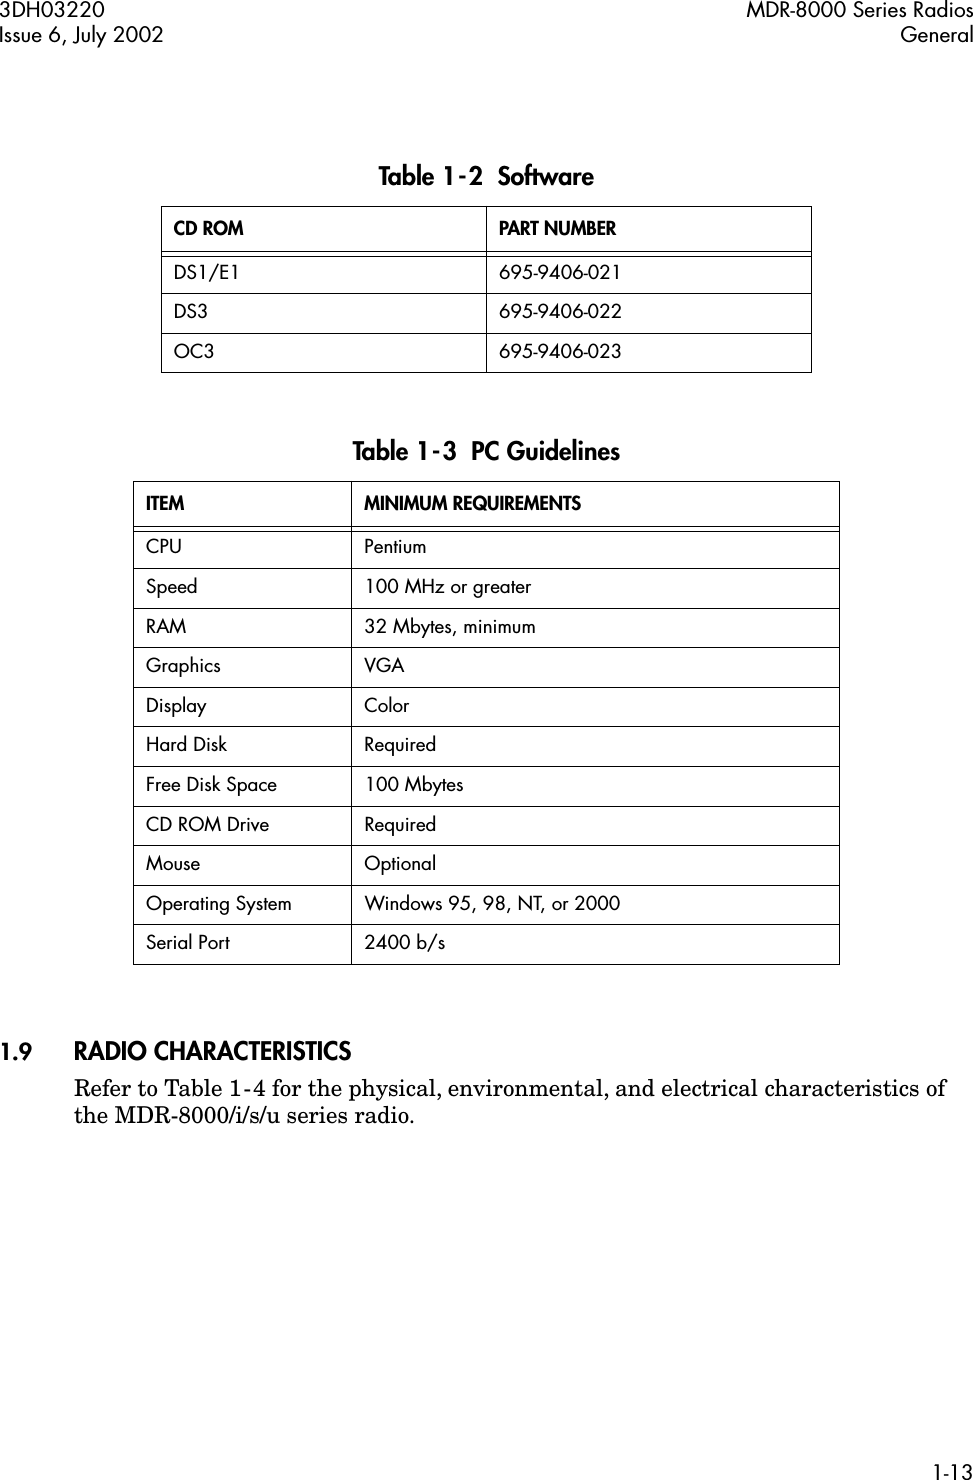  3DH03220 MDR-8000 Series RadiosIssue 6, July 2002 General1-13 1.9 RADIO CHARACTERISTICS Refer to Table 1-4 for the physical, environmental, and electrical characteristics of the MDR-8000/i/s/u series radio. Table 1-2  Software CD ROM PART NUMBER DS1/E1 695-9406-021DS3 695-9406-022OC3 695-9406-023 Table 1-3  PC Guidelines ITEM MINIMUM REQUIREMENTS CPU PentiumSpeed 100 MHz or greaterRAM 32 Mbytes, minimumGraphics VGADisplay ColorHard Disk RequiredFree Disk Space 100 MbytesCD ROM Drive RequiredMouse OptionalOperating System Windows 95, 98, NT, or 2000Serial Port 2400 b/s